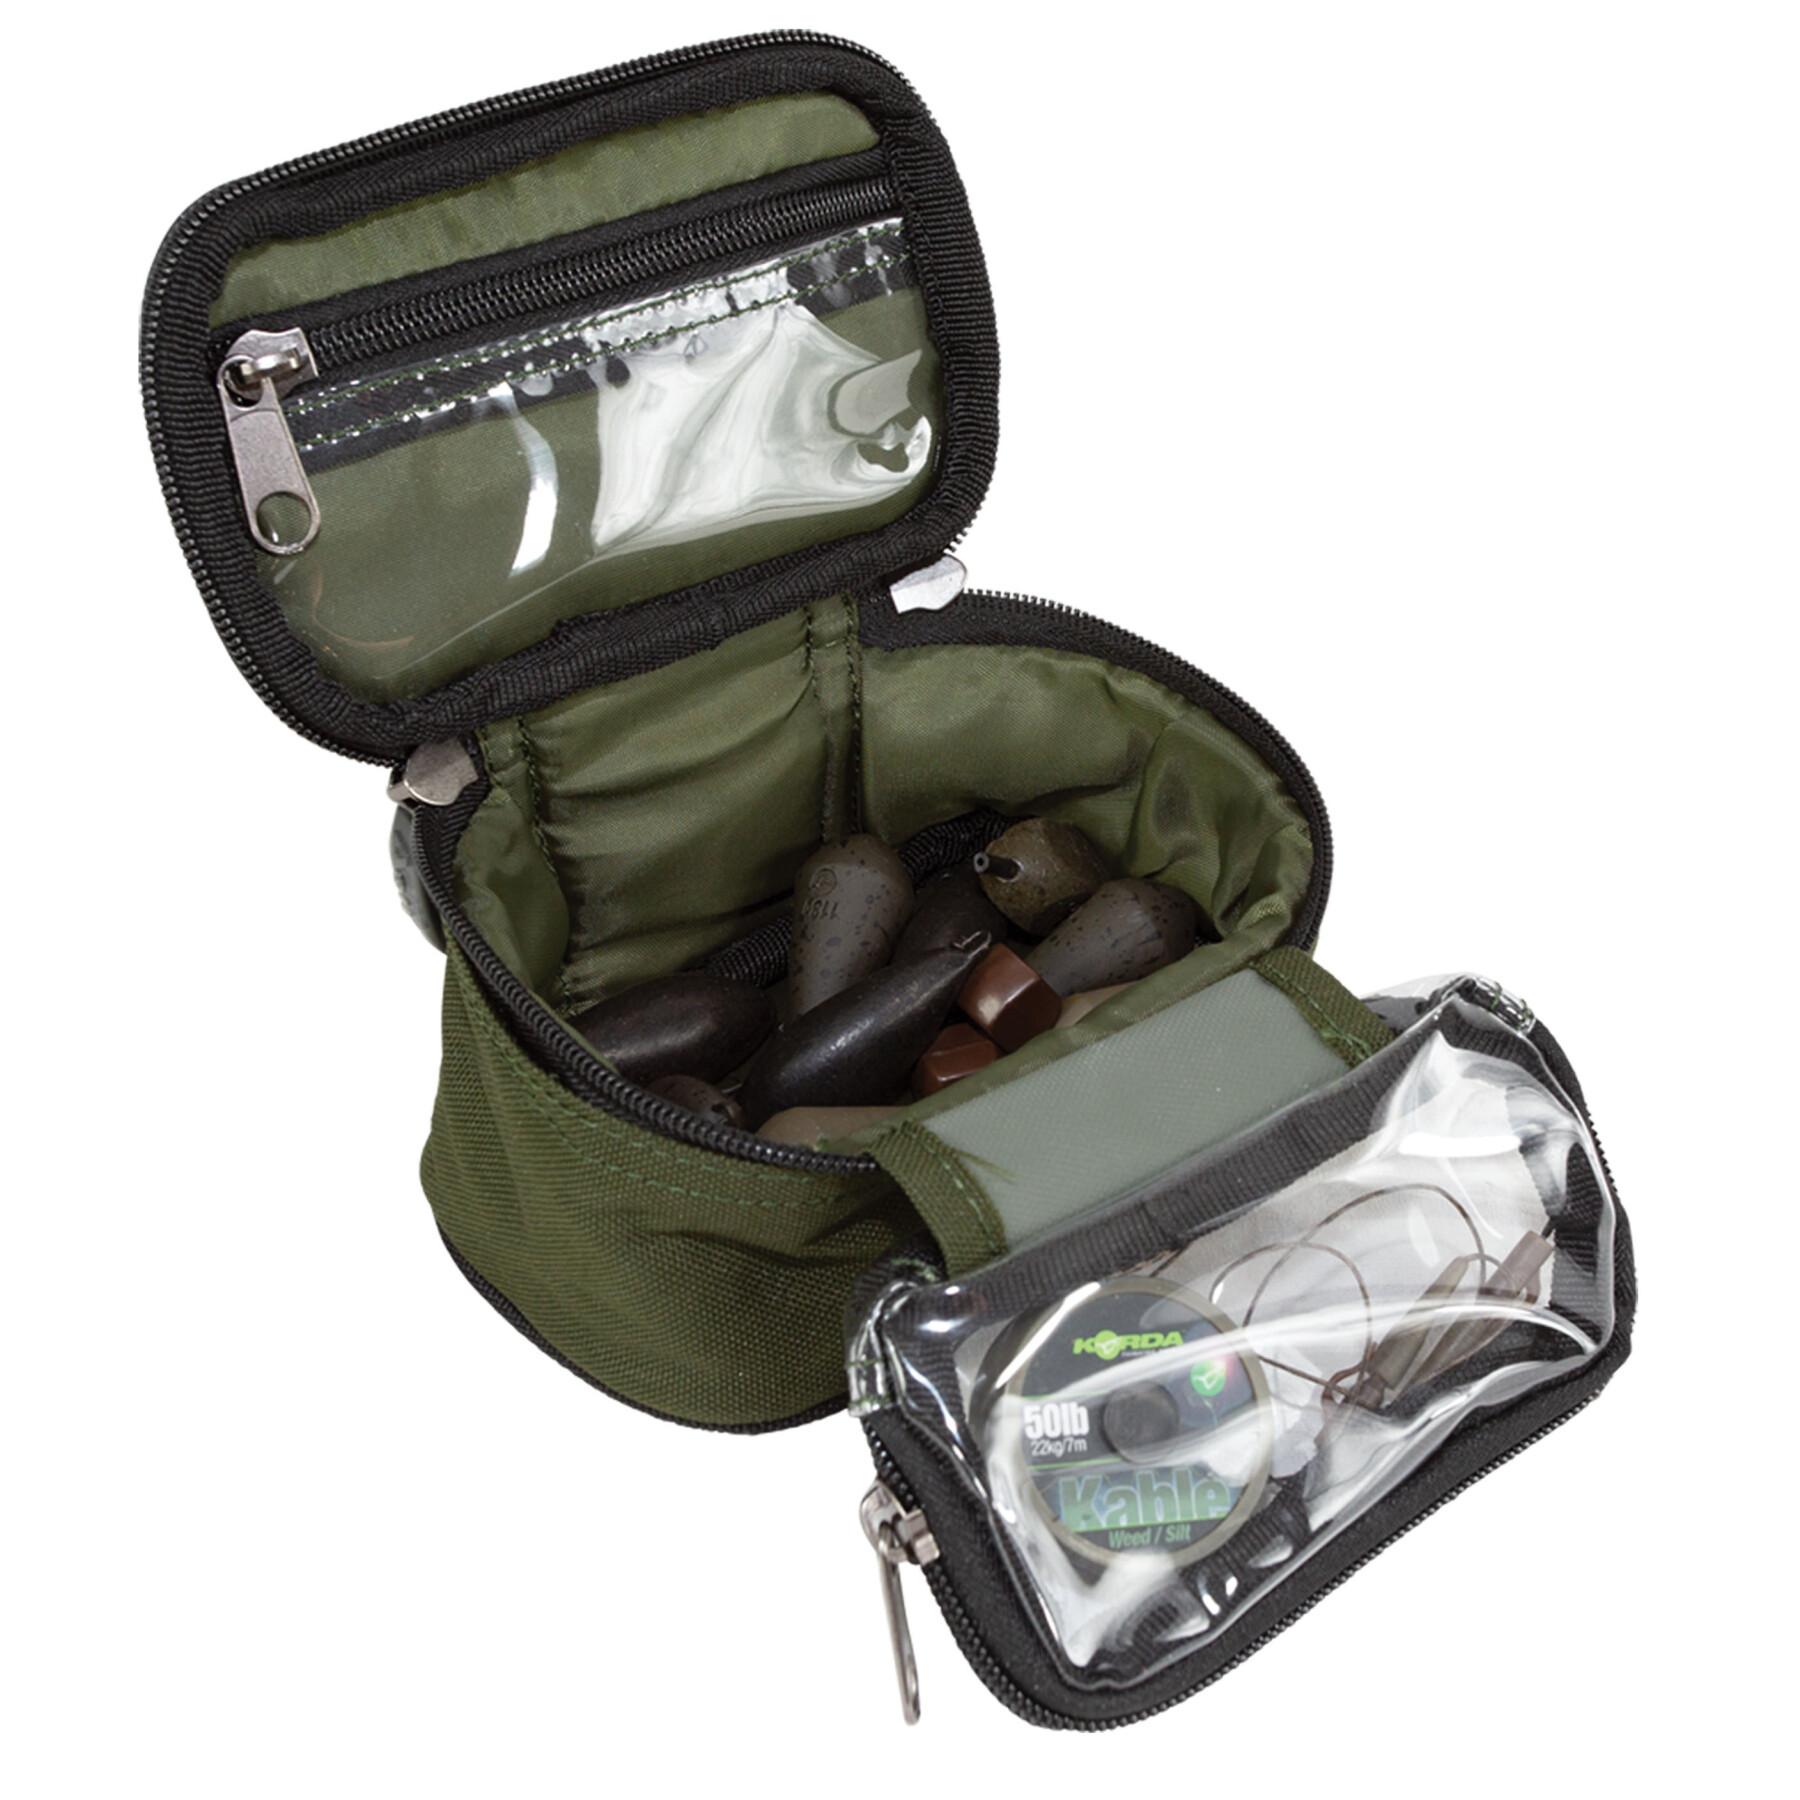 Sac Aqua Products lead and leader pouch black series